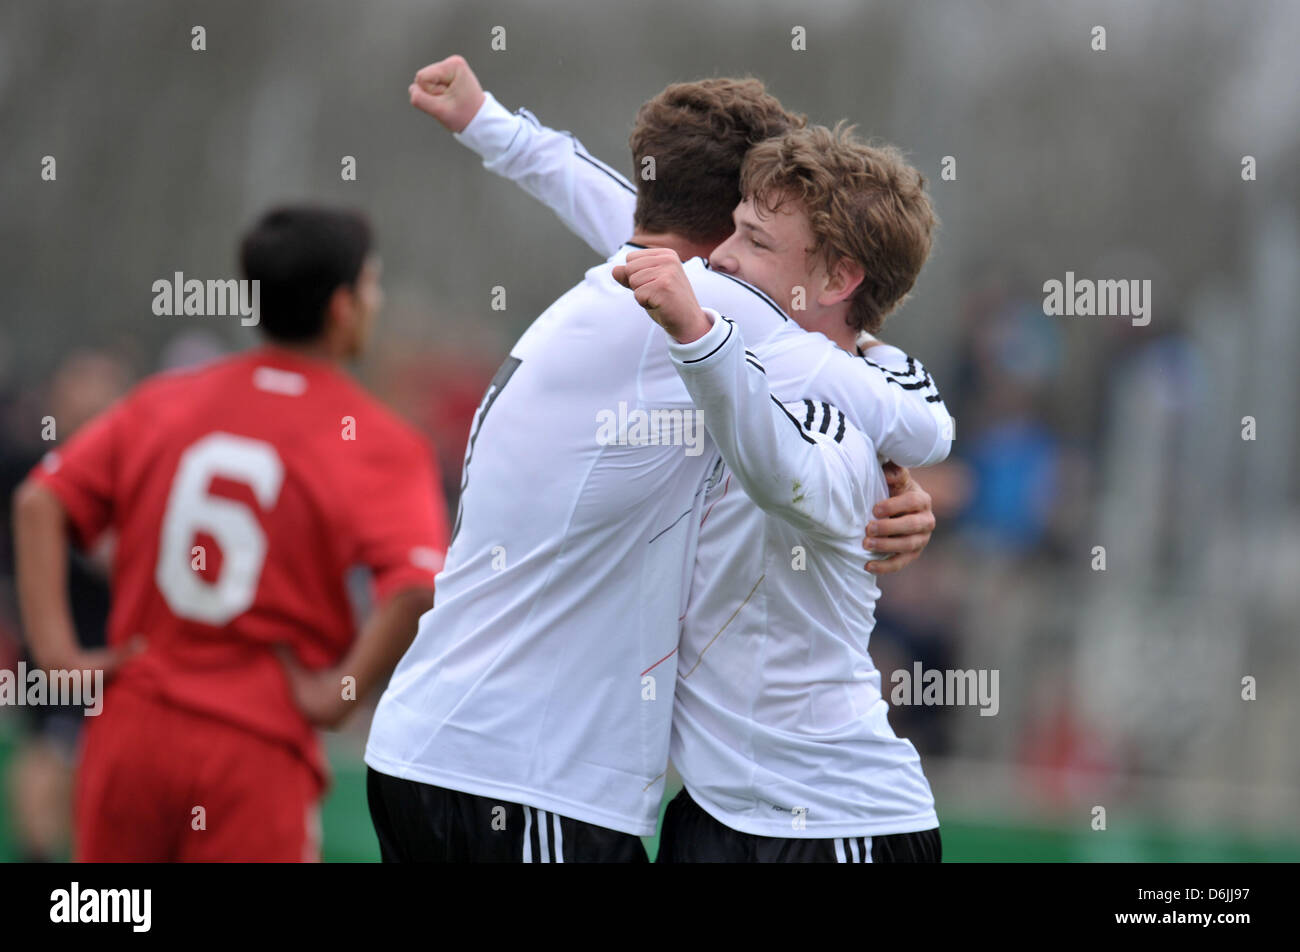 Germany's Maximilian Dittgen (L) celebrates his 2-0 goal with Max Meyer, who scored the 1-0 goal, during the European U-17 Football Championship elite round qualification match between Germany and Turkey at Sportpark Vinnenweg in Bremen, Germany, 20 March 2012. Photo: CARMEN JASPERSEN Stock Photo